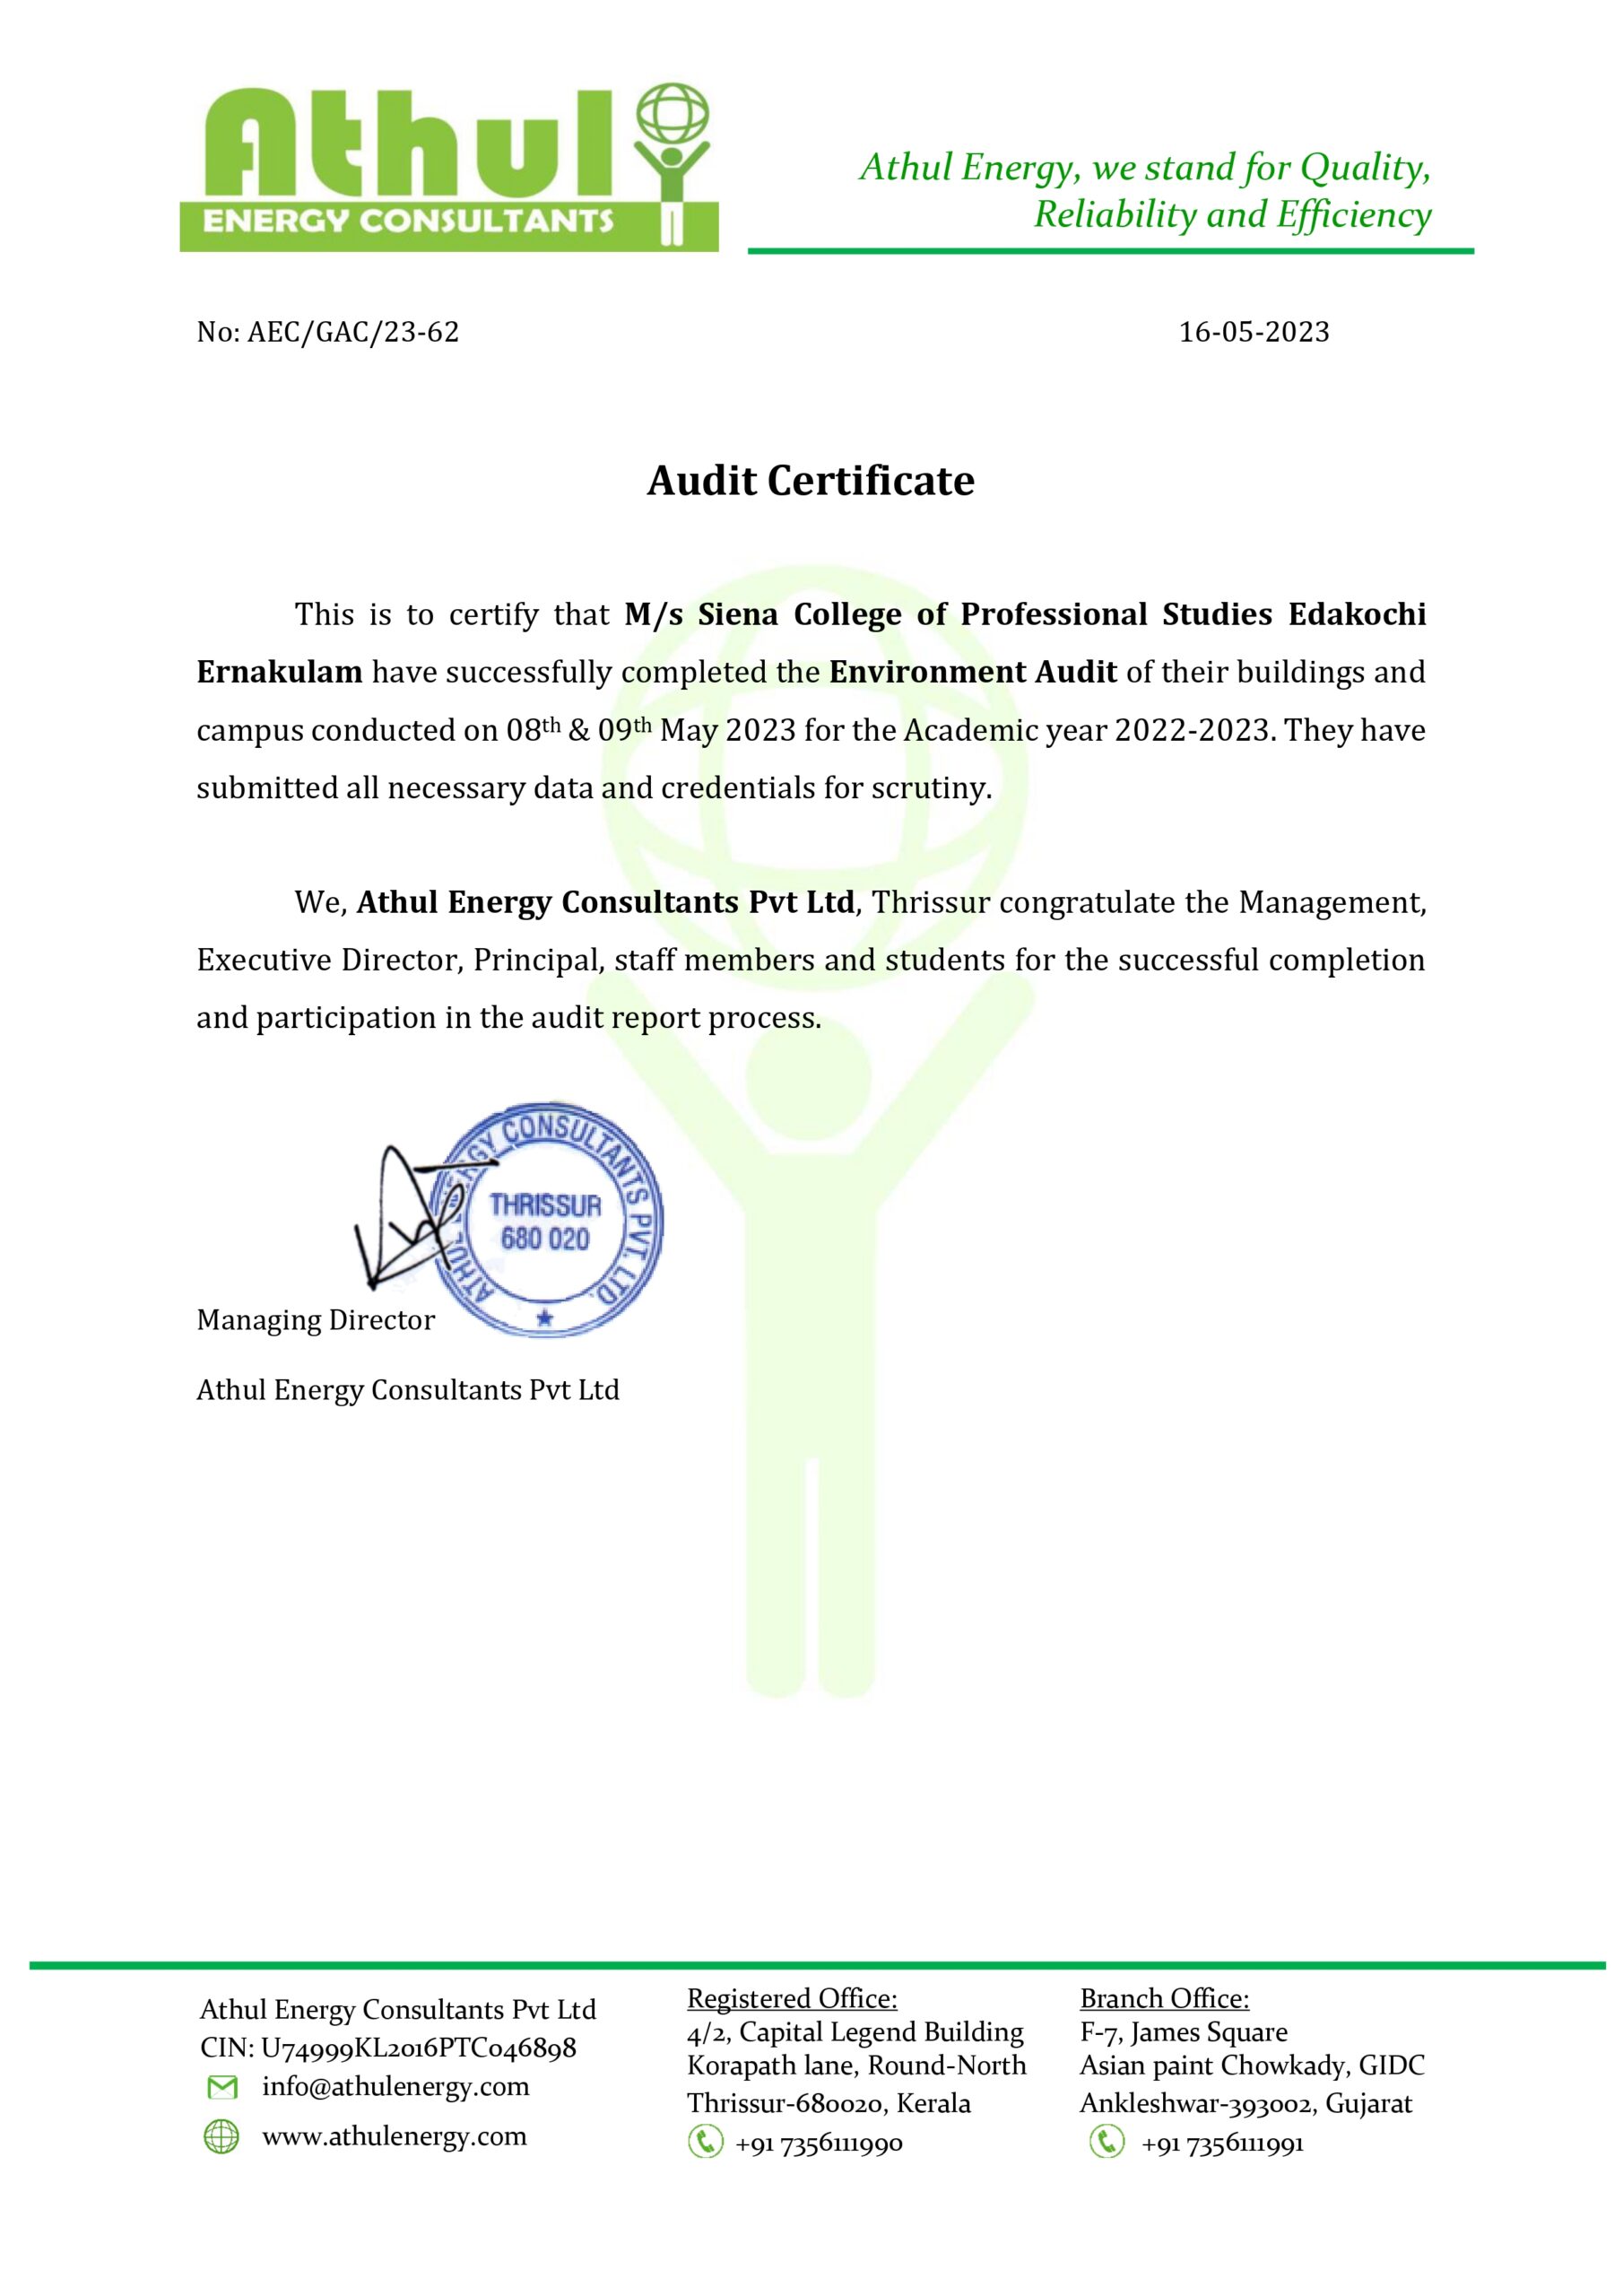 Siena college certificate-Environment (1)_page-0001